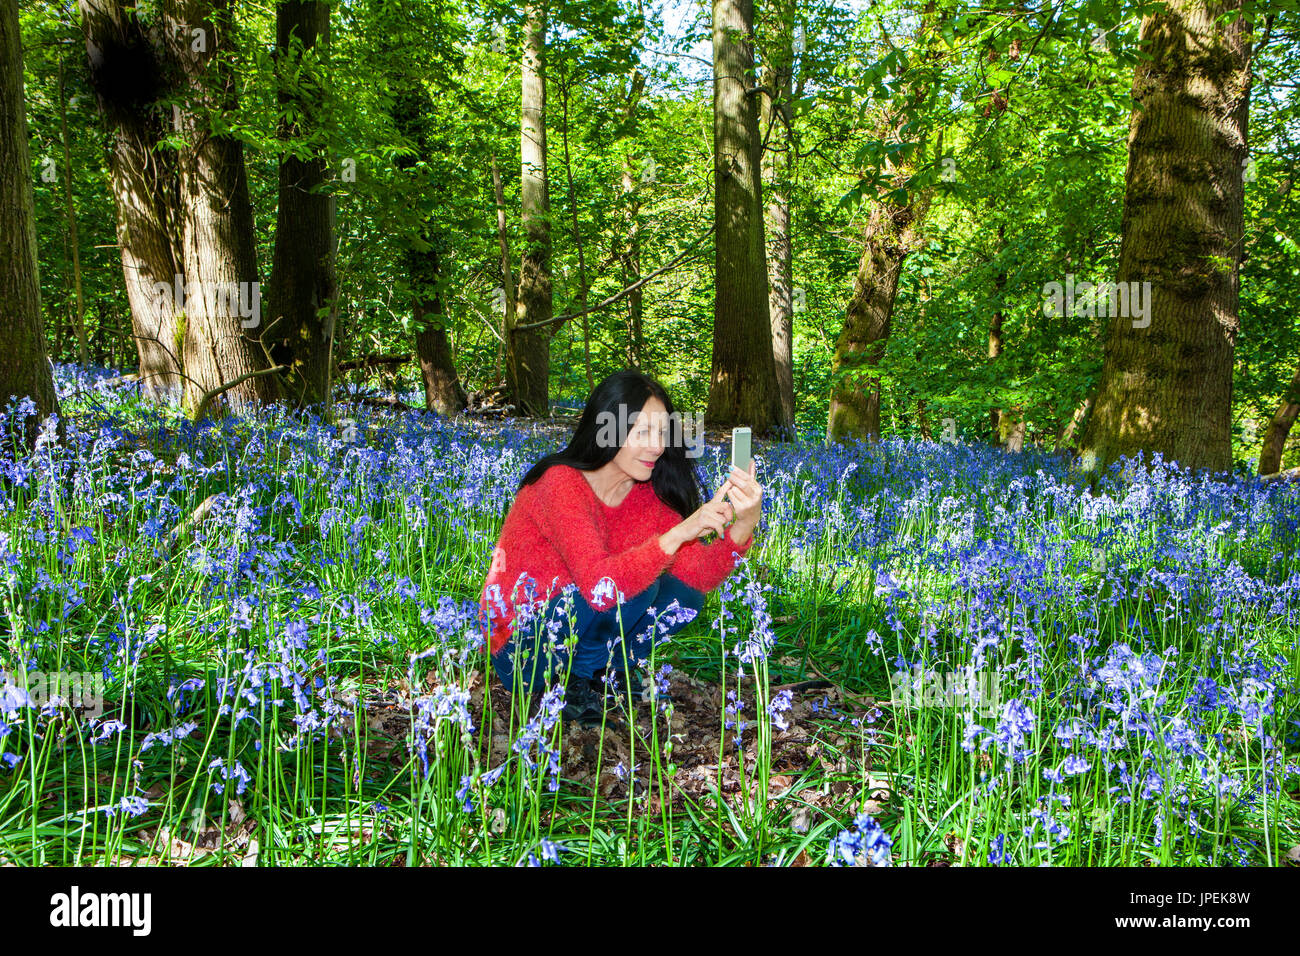 Woman in Bluebell Woodland taking photograph Stock Photo